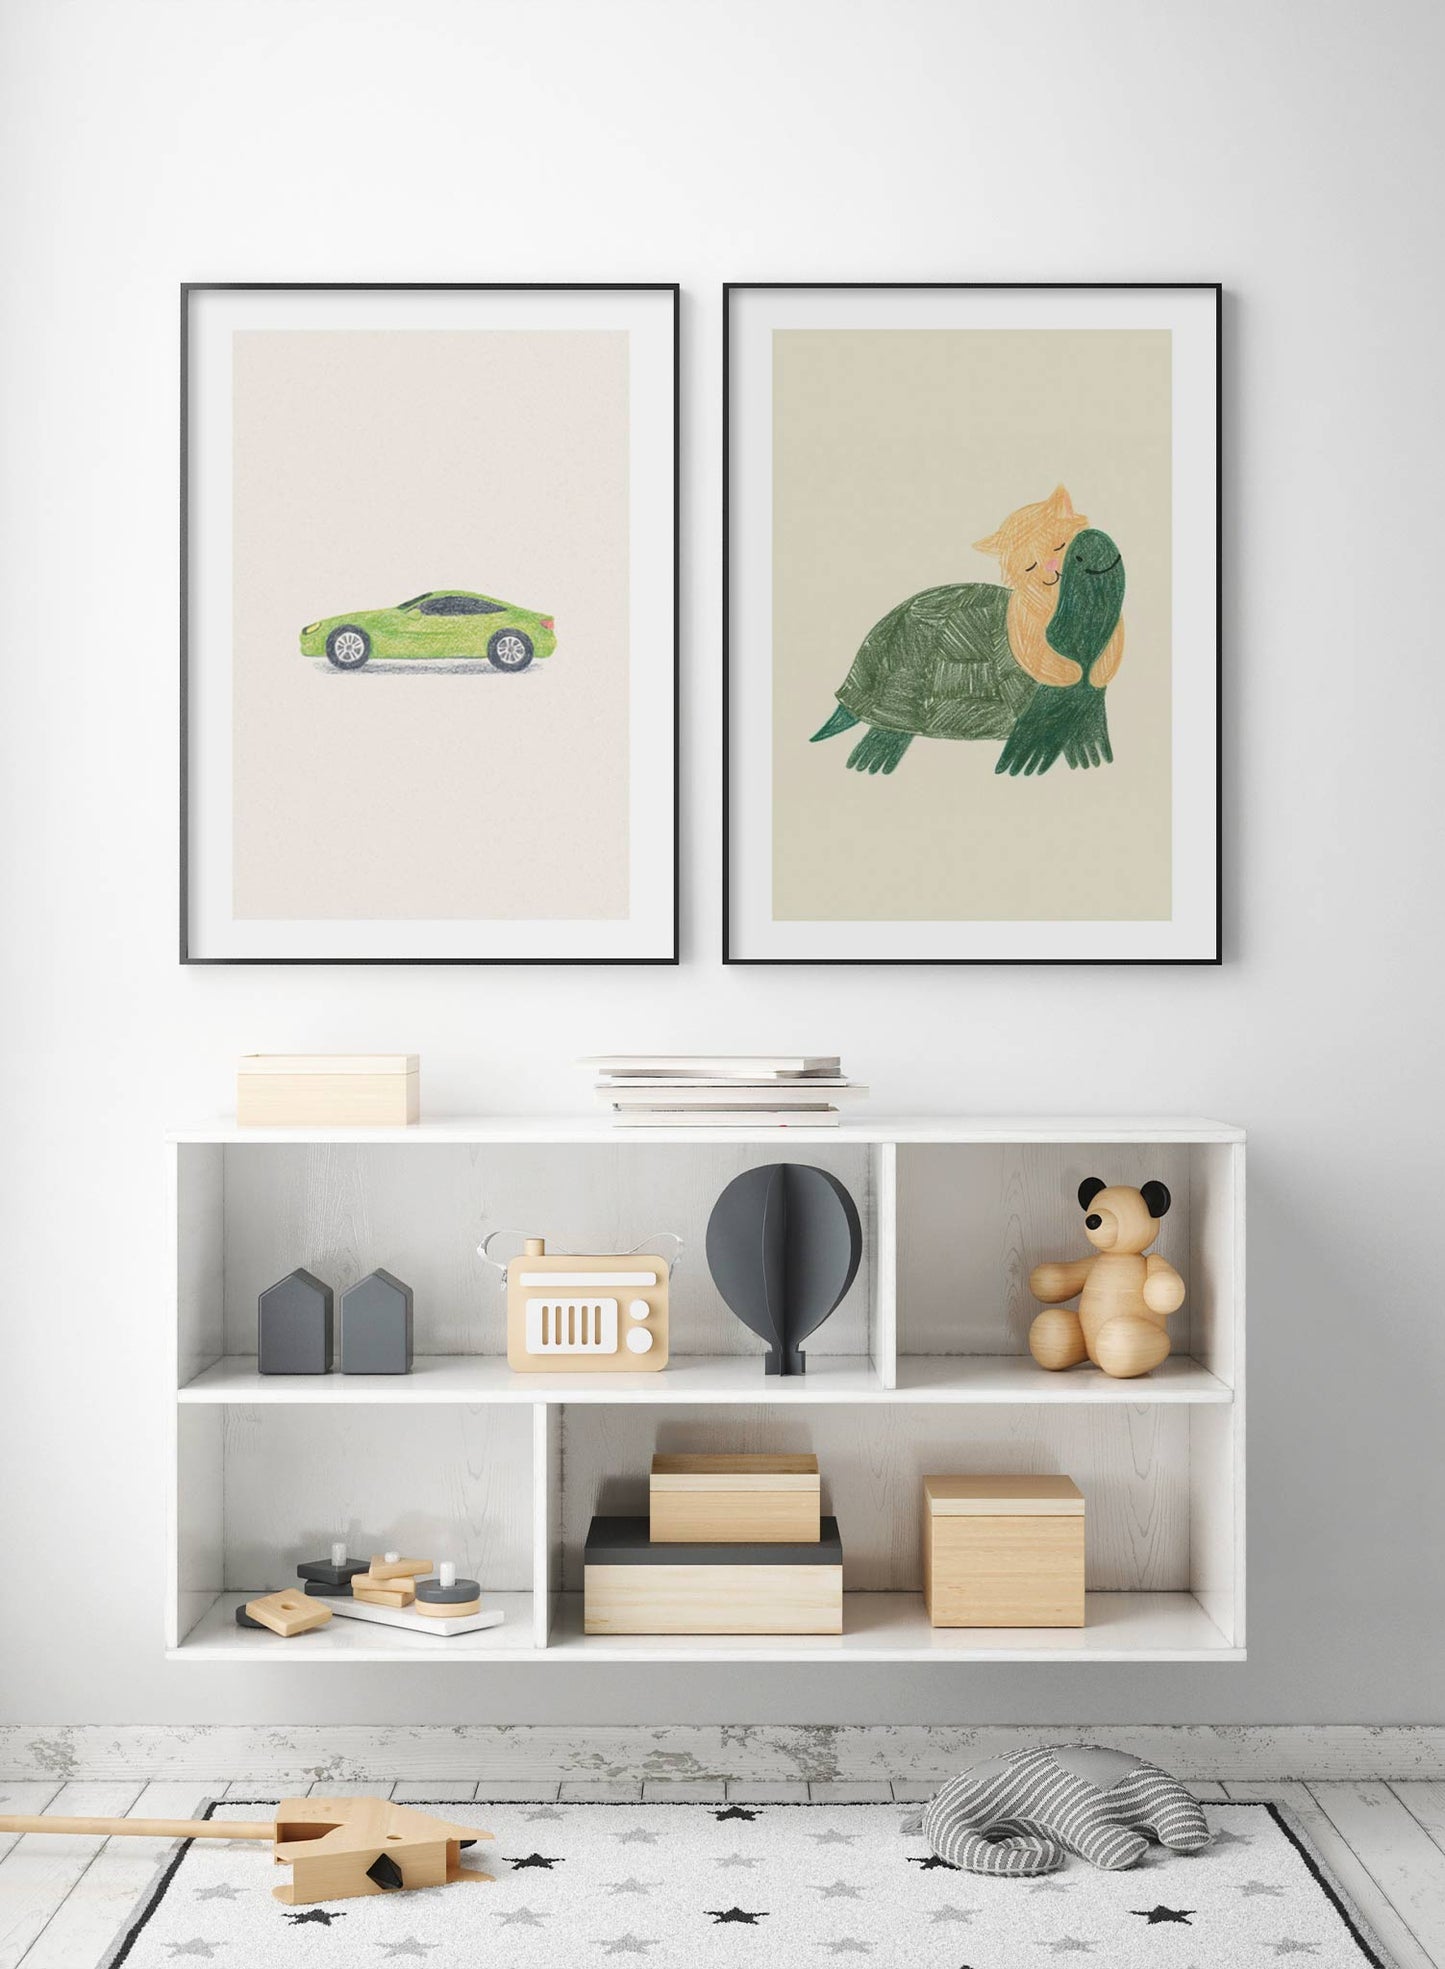 Hot Wheels is a minimalist illustration by Opposite Wall of a green toy sports car.